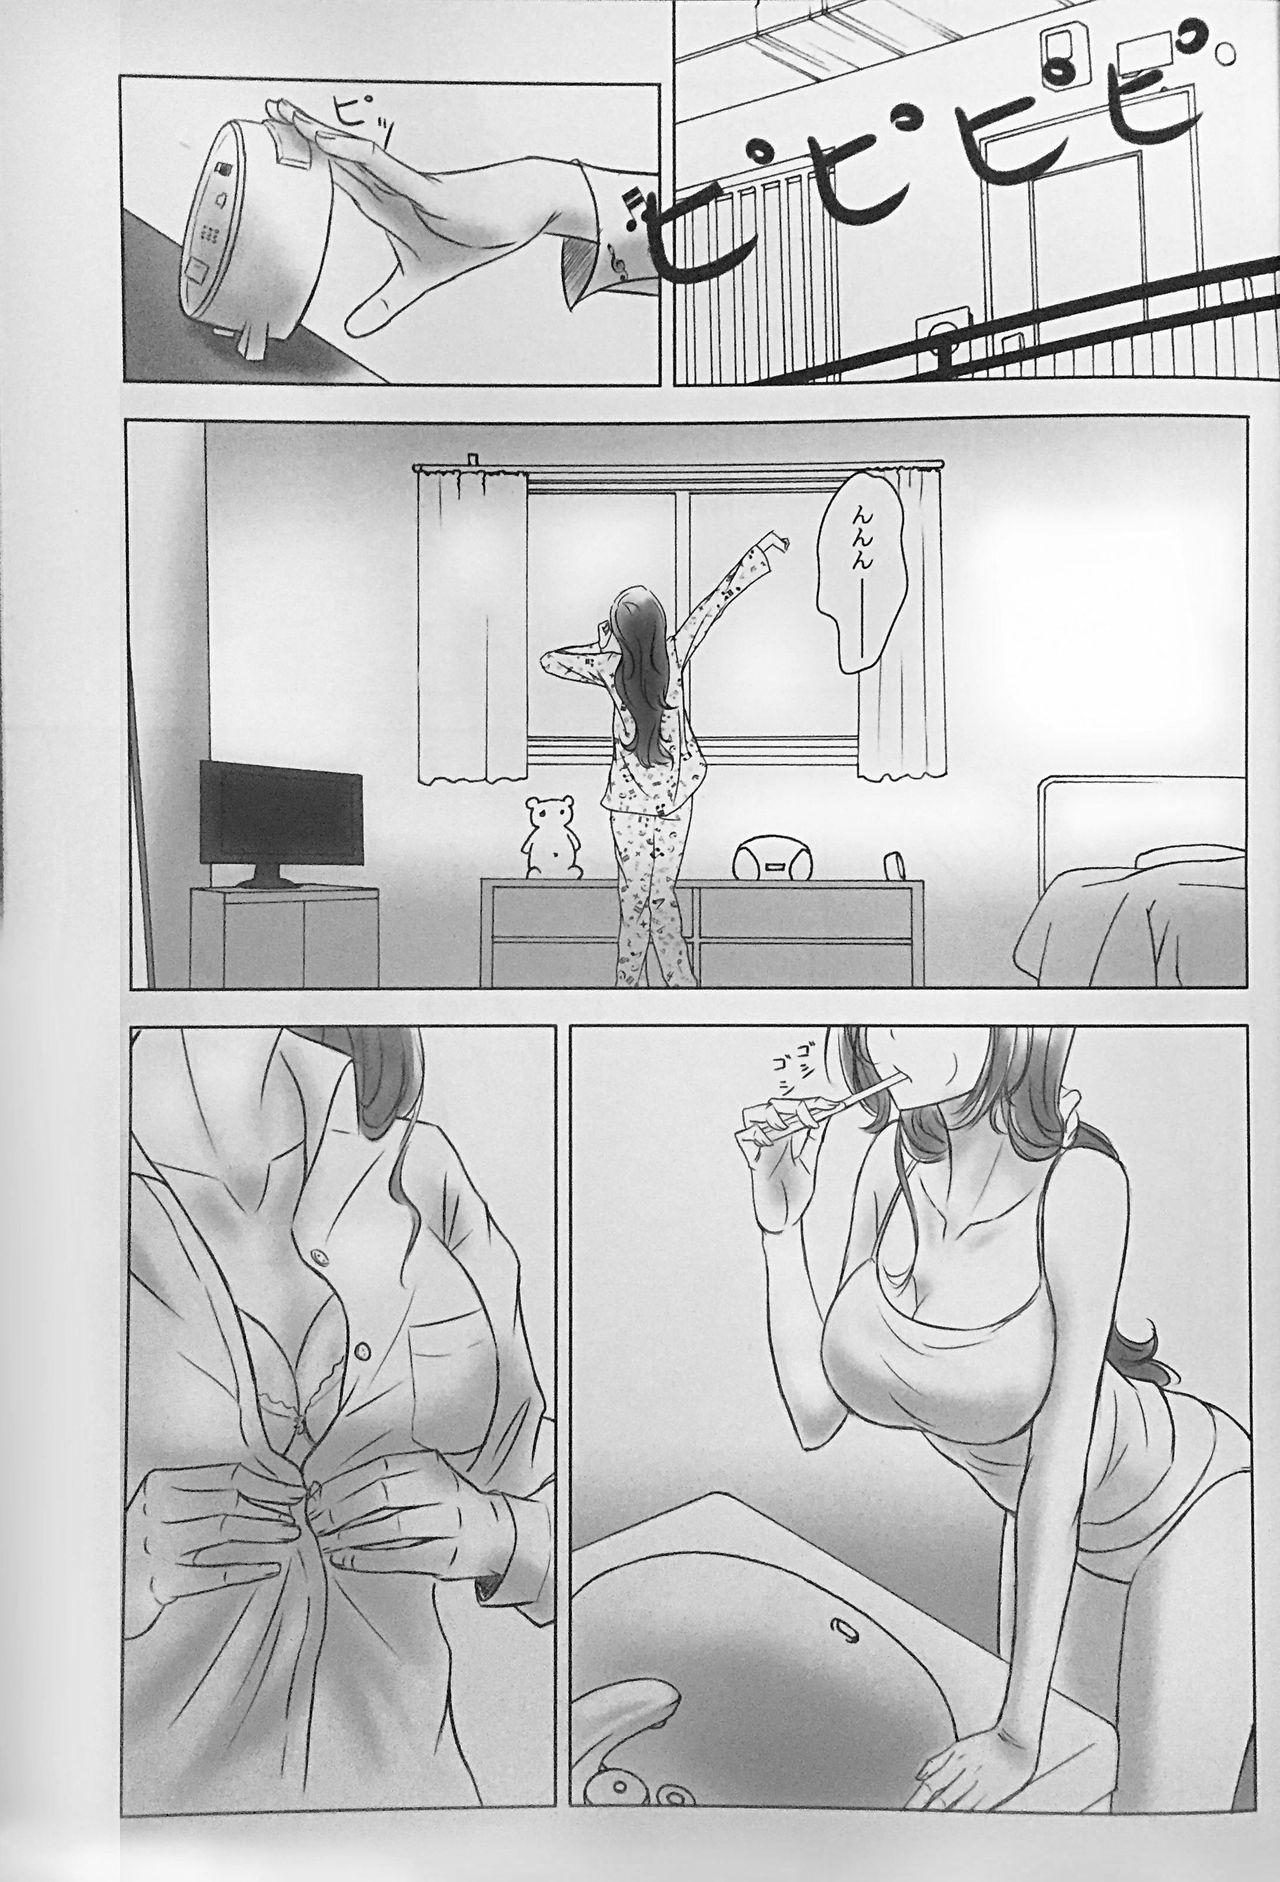 Pov Sex Two Hearts You're not alone #2 - Bleach Hardcoresex - Page 3